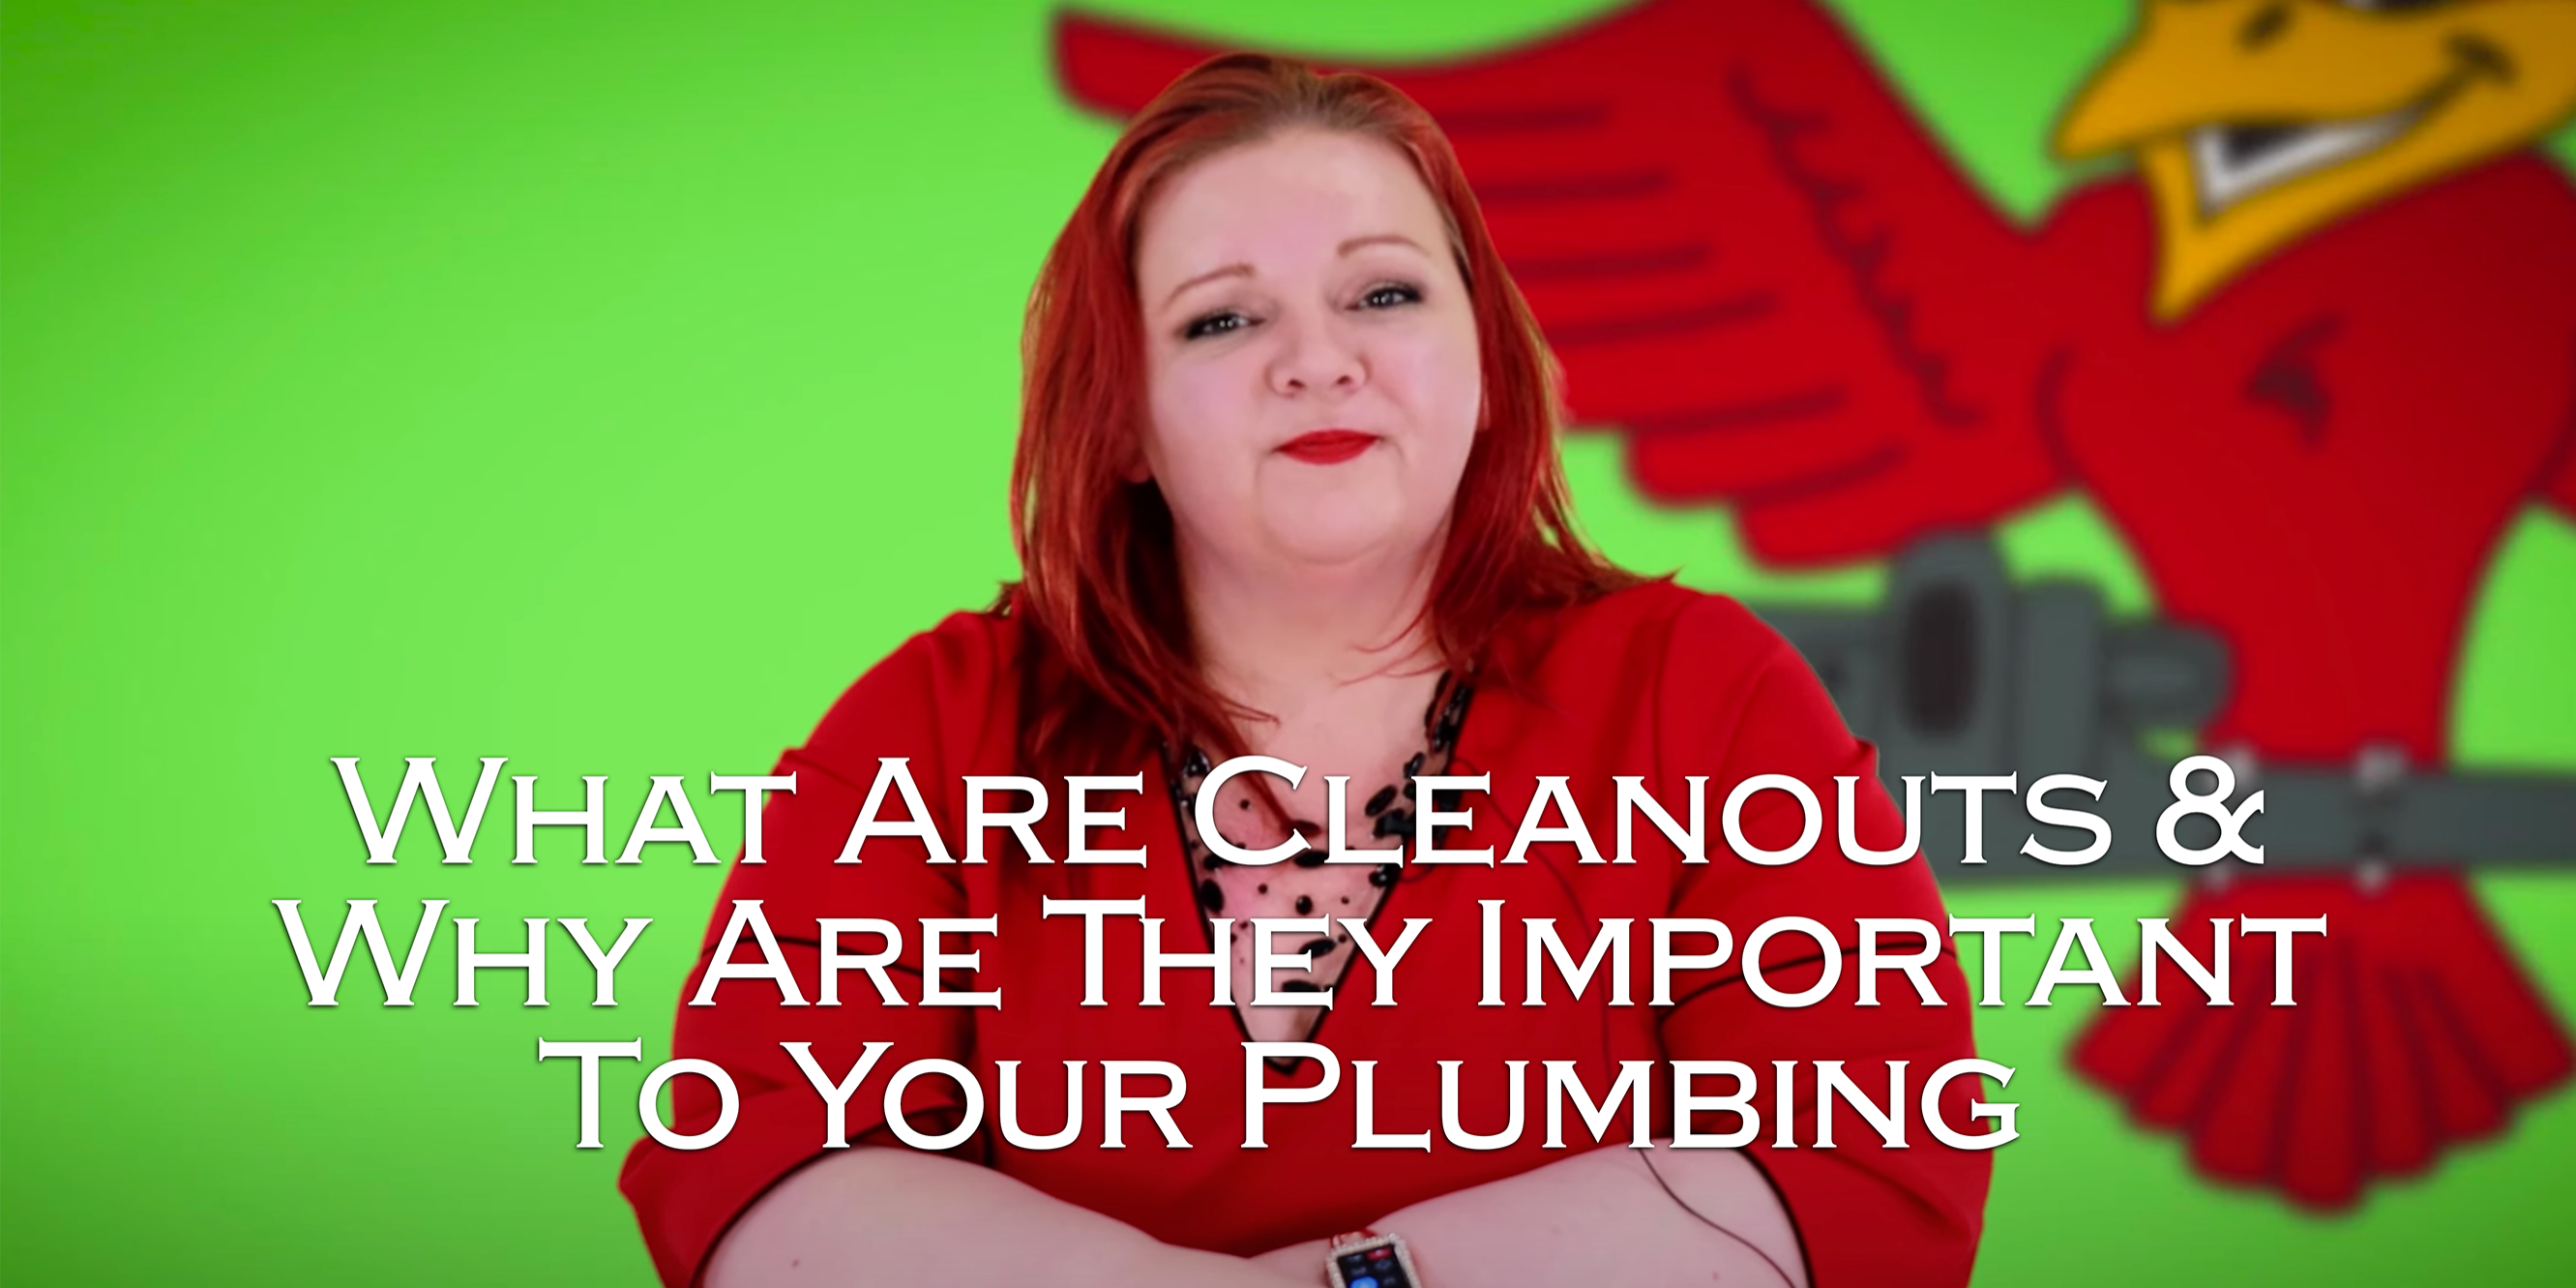 Robins Plumbing owner Stephanie Robins presenting the blog titled what are cleanouts why are they important to your plumbing system